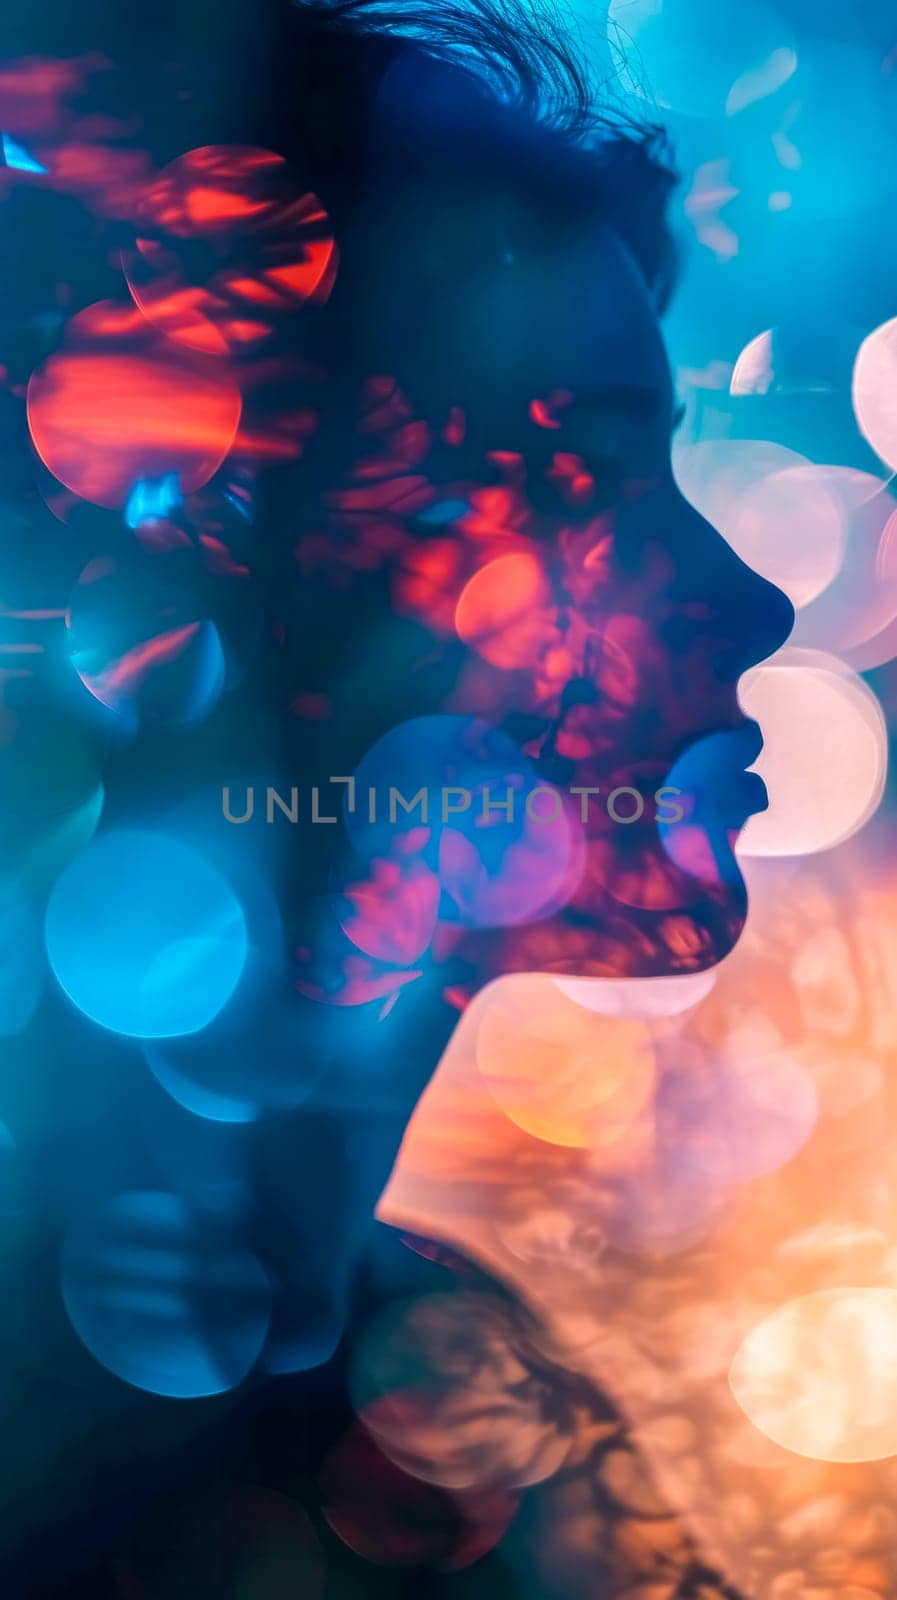 profile of a person overlaid with a vibrant array of bokeh lights in blue and red hues, creating a captivating and ethereal visual effect that's both mysterious and artistic, vertical